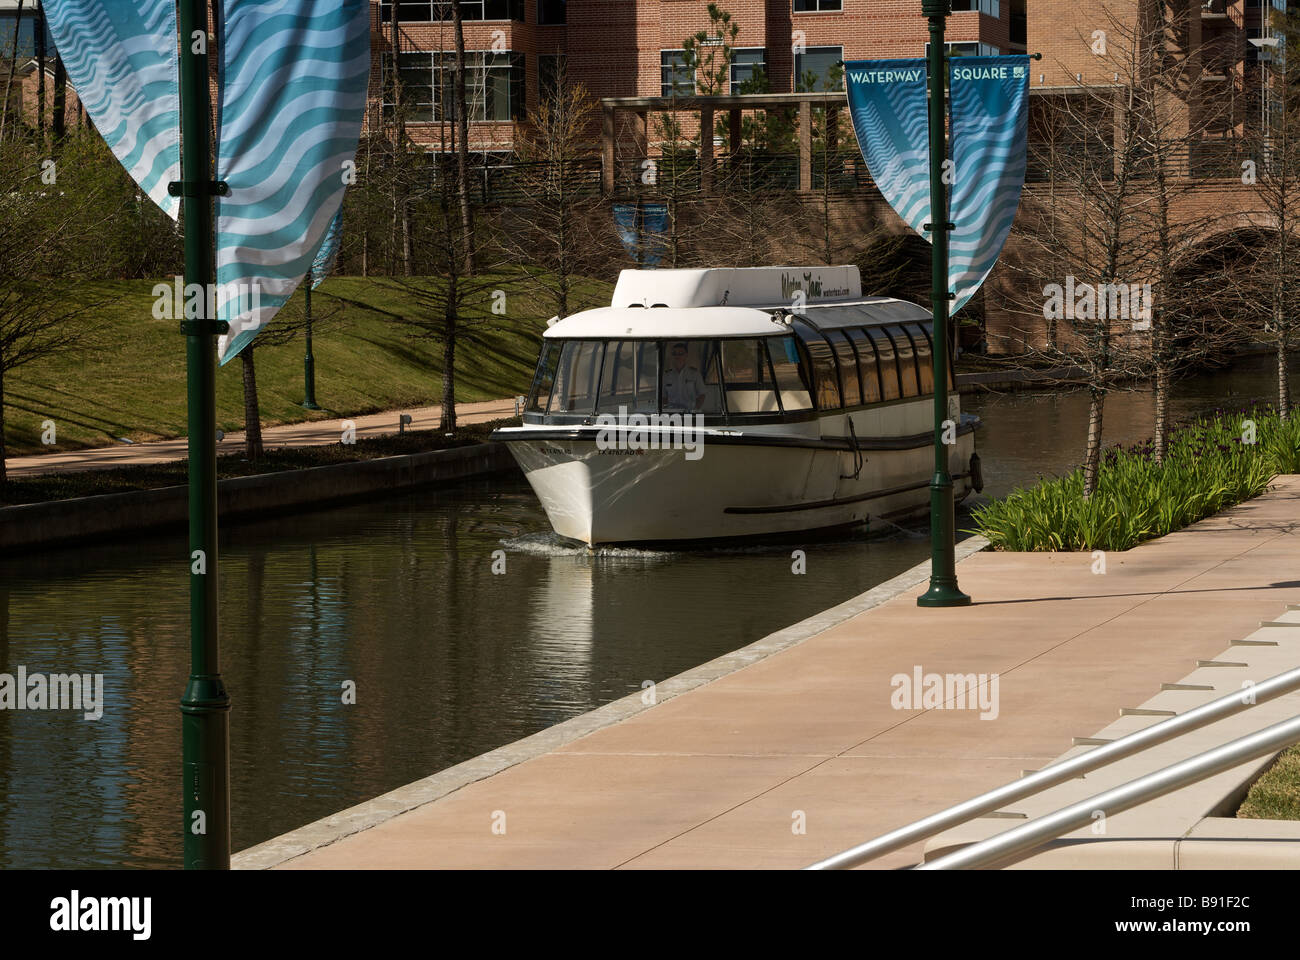 the water taxi on the riverwalk in The Woodlands Mall area Stock Photo